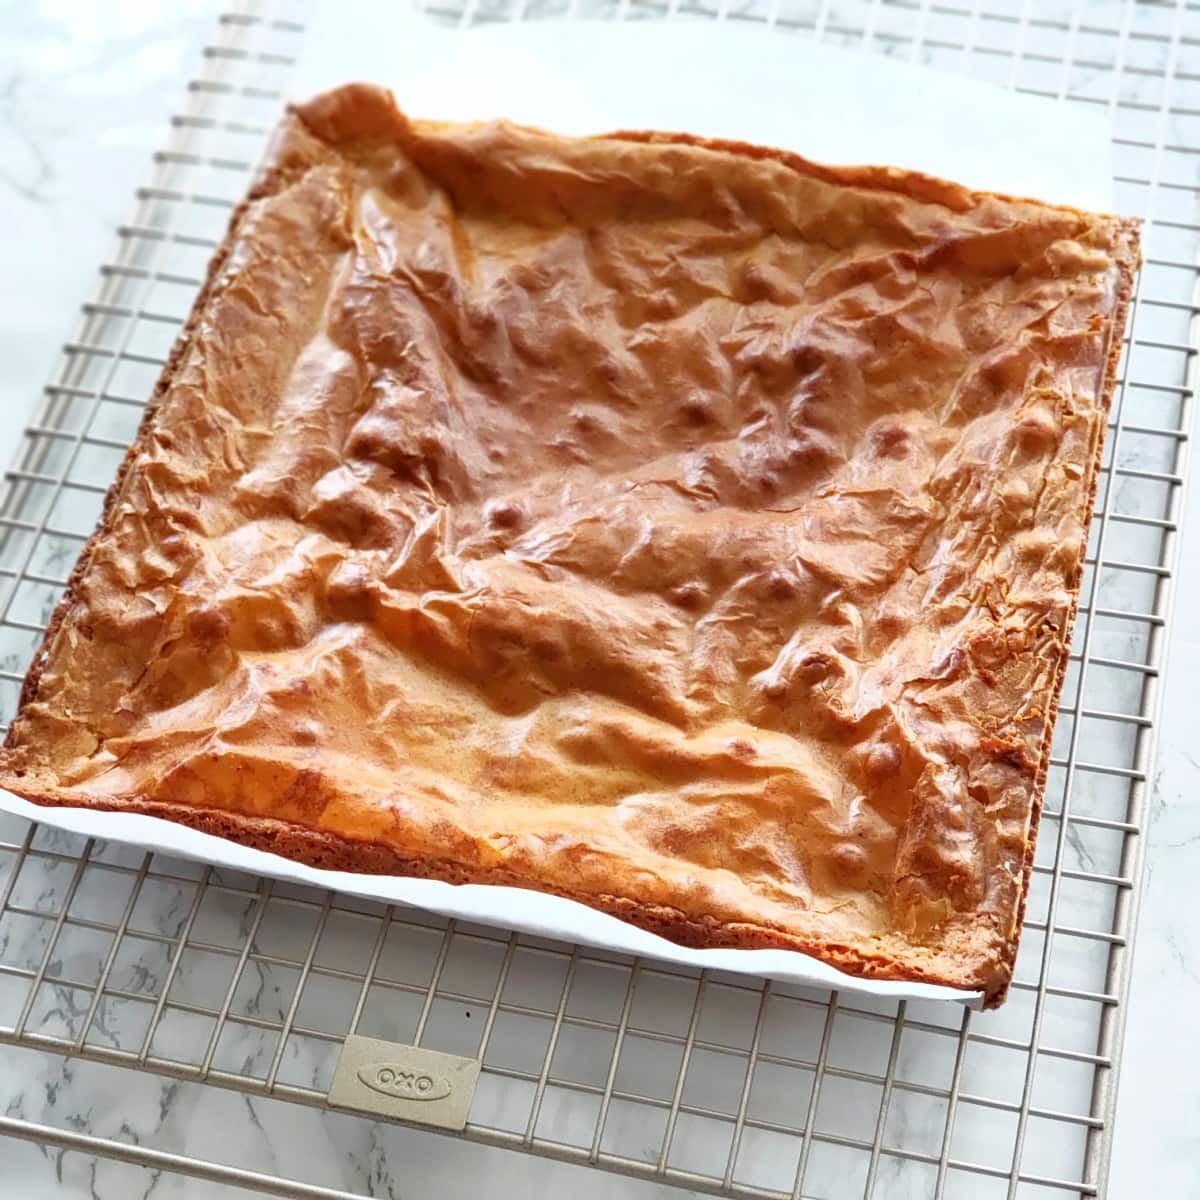 Square baked blondies with a light brown surface sit on their parchment paper on a cooling rack